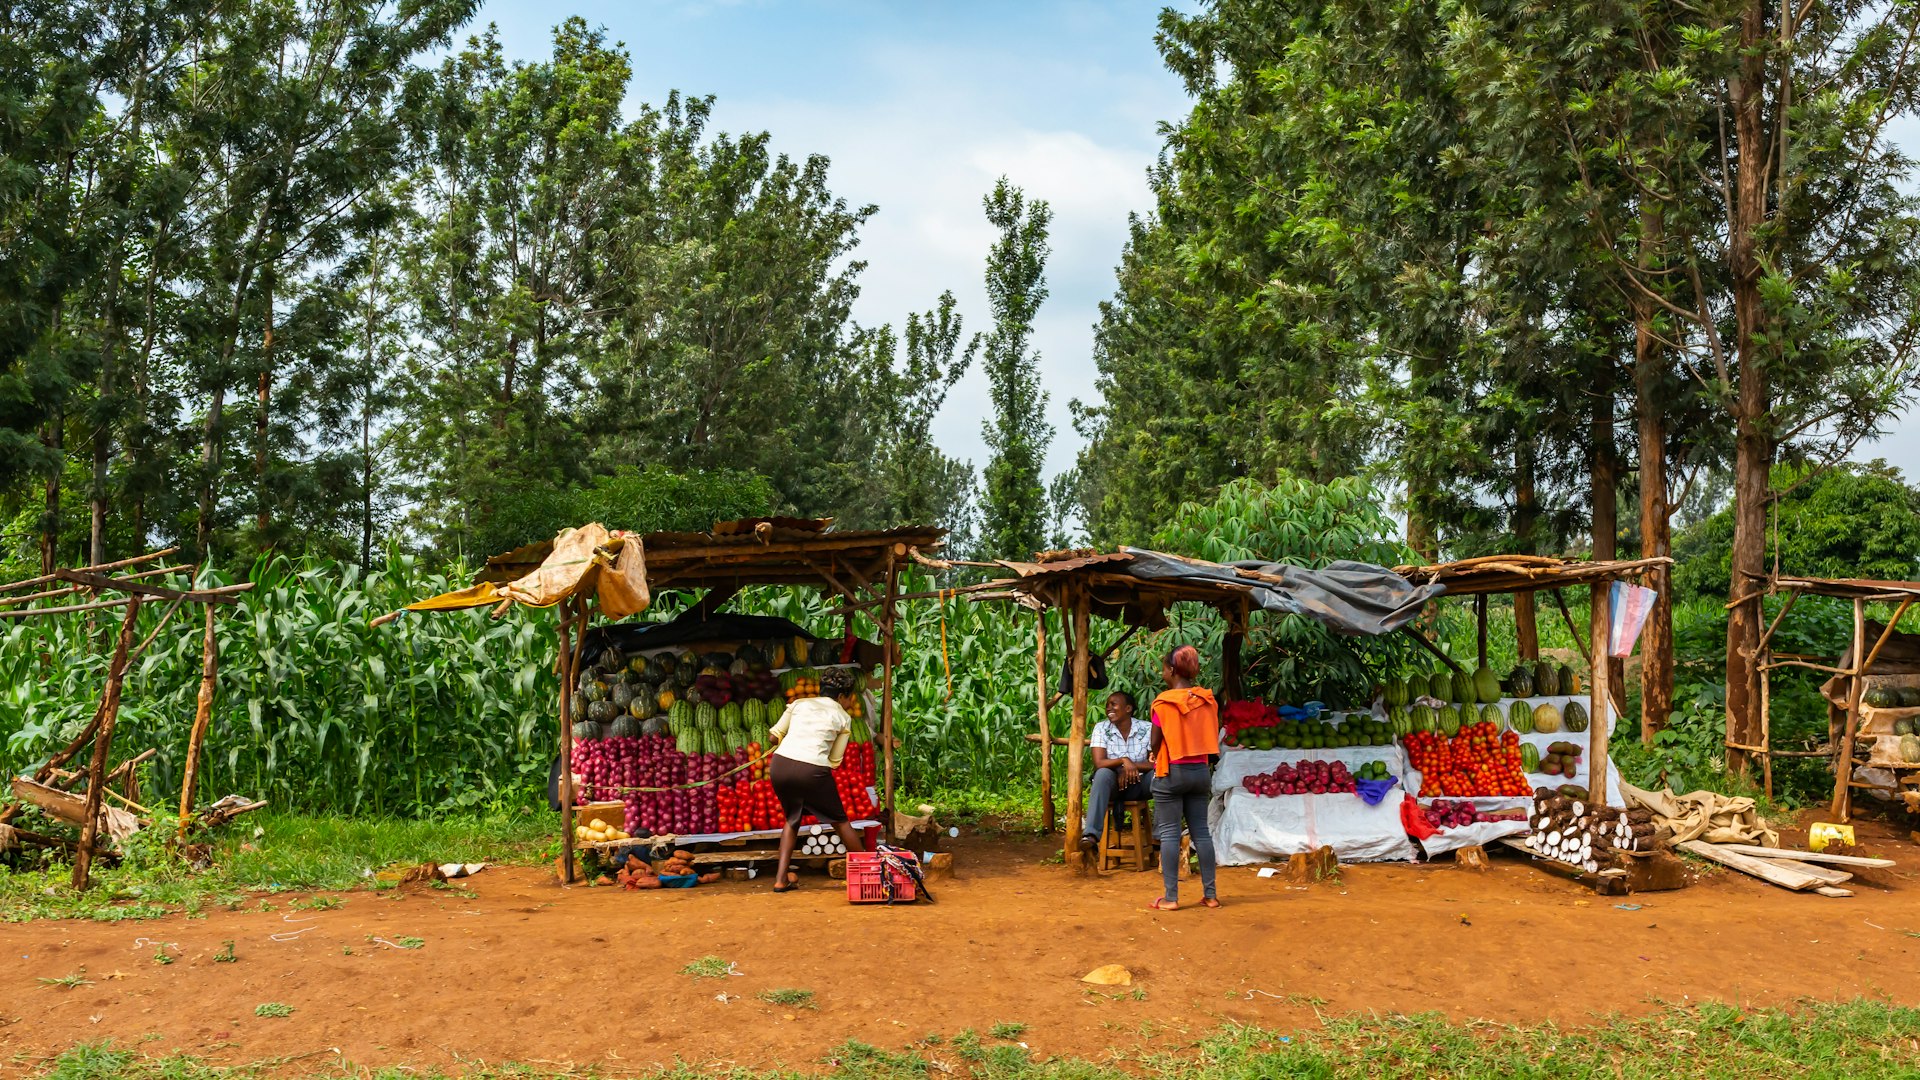 Kenyan market stalls on the side of the Nairobi Highway (A2).